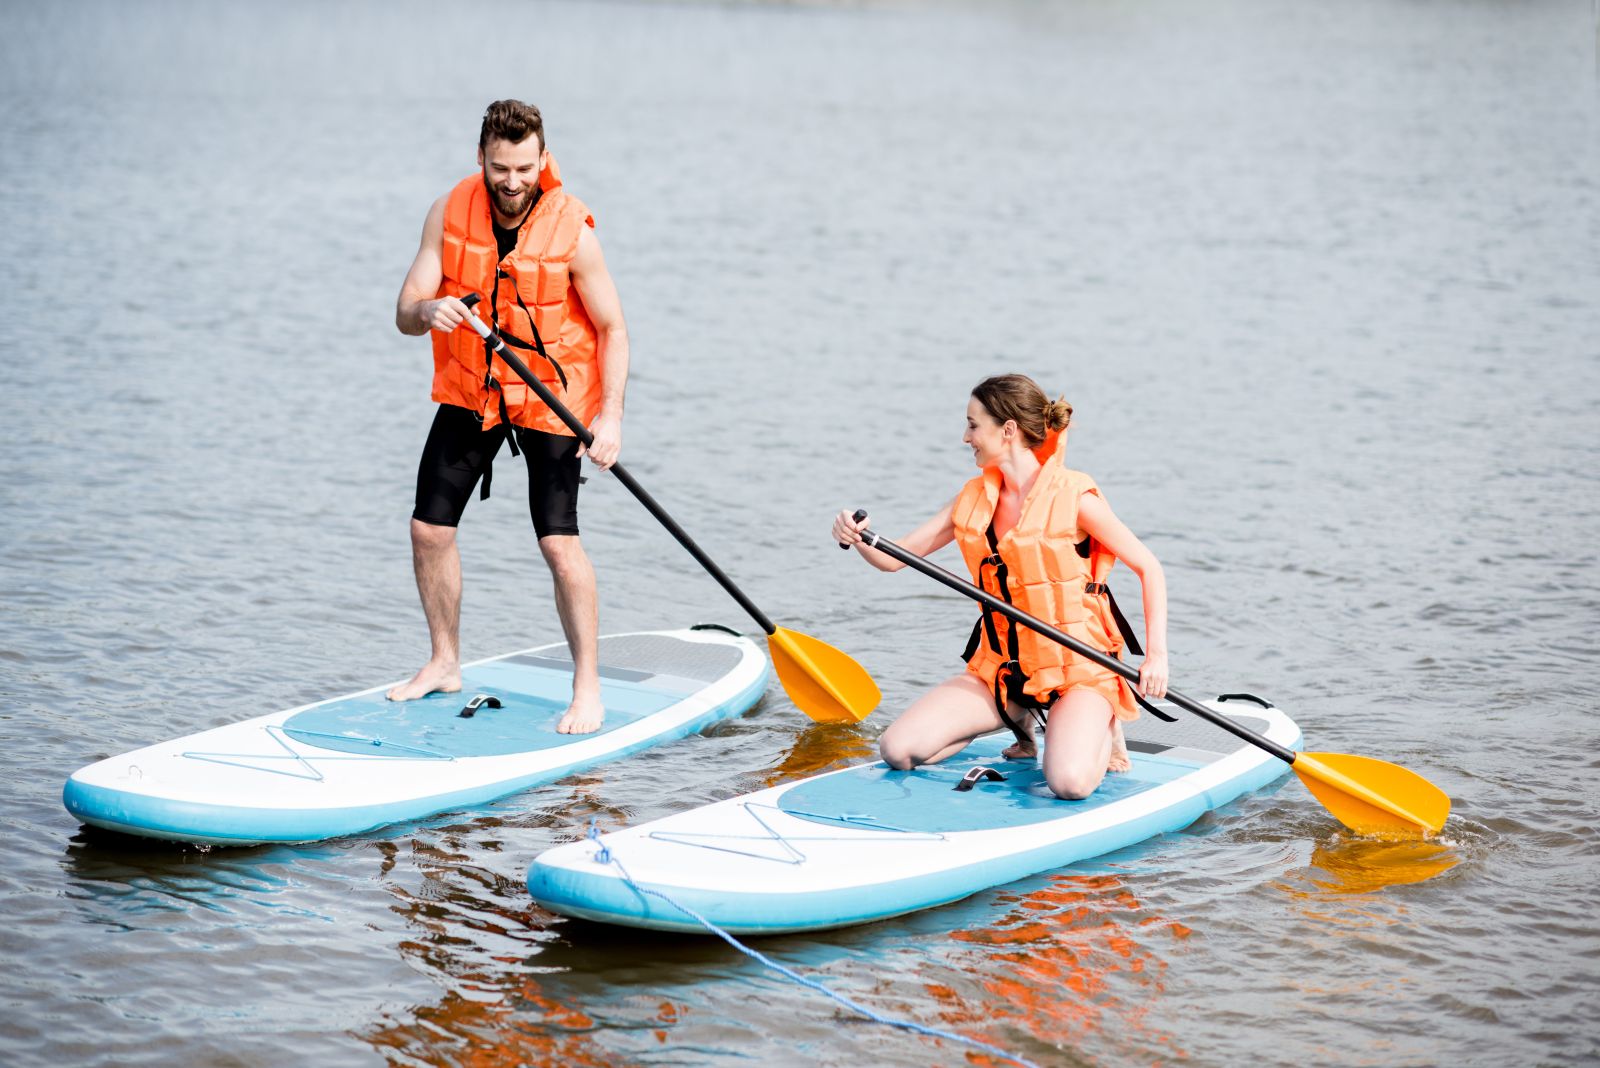 Two people joyfully engage in paddle boarding on a calm lake, both standing on blue paddleboards and wearing orange life jackets, showcasing an active and fun outdoor water activity.